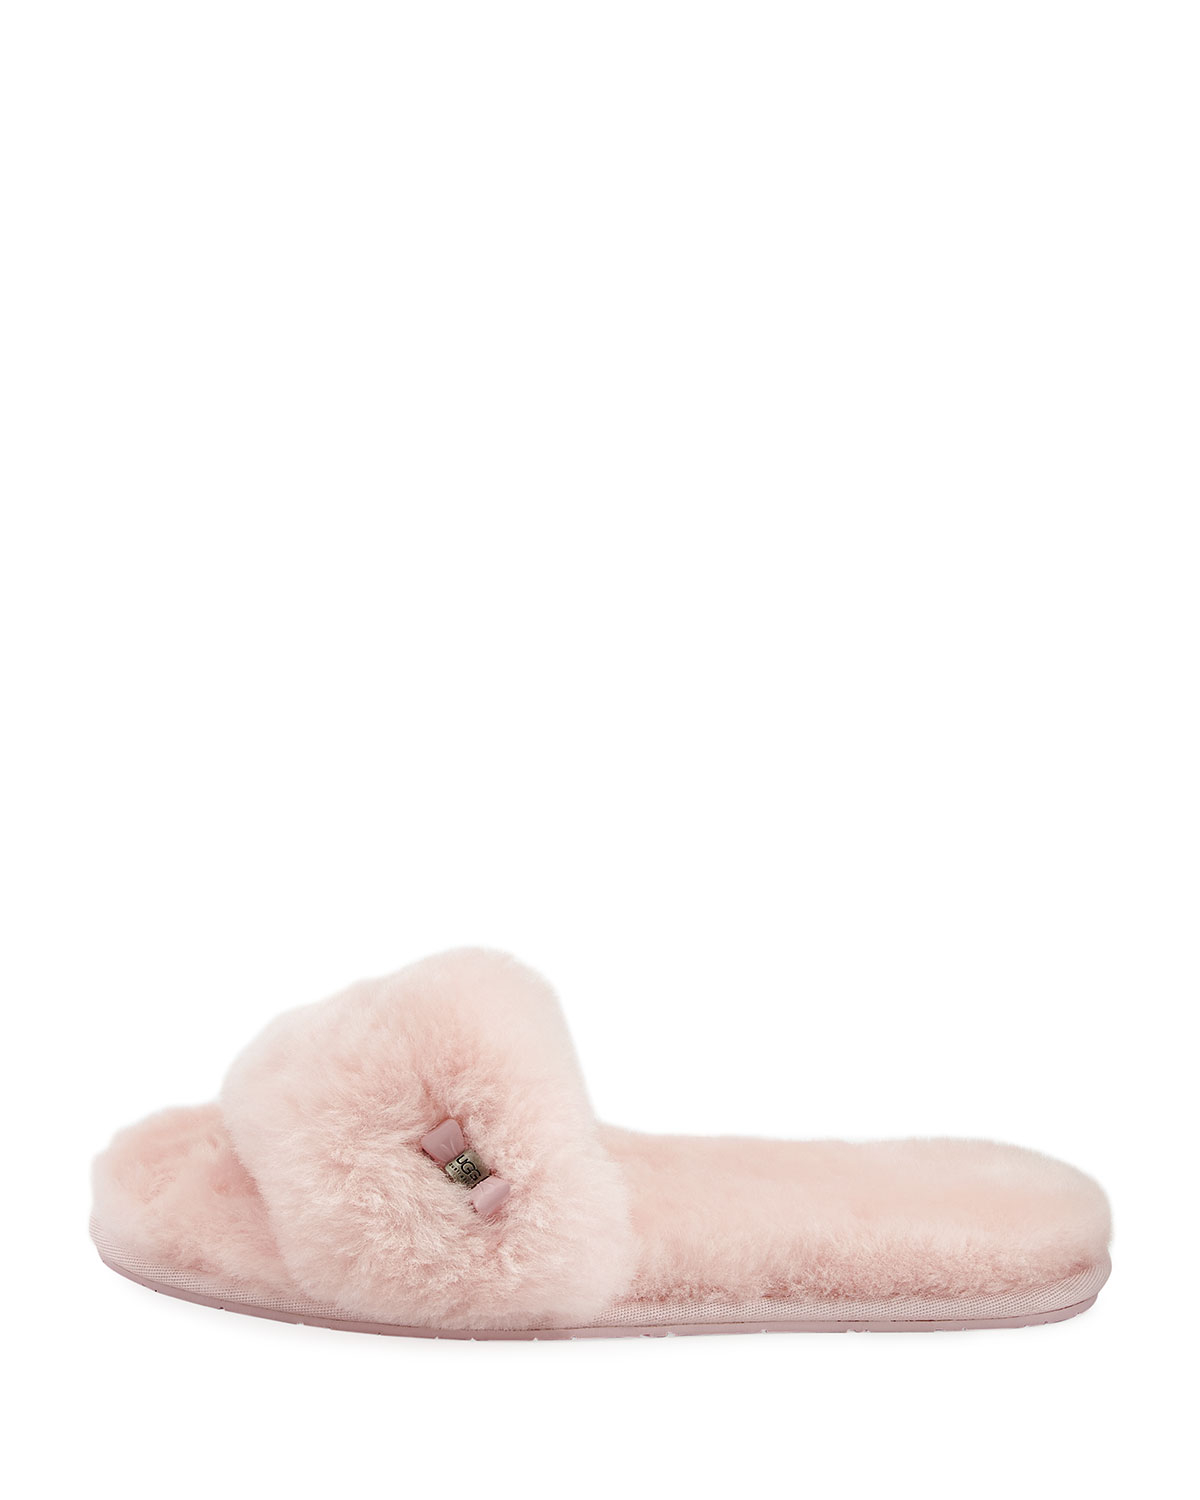 Lyst - Ugg 'classic Short' Boot in Pink